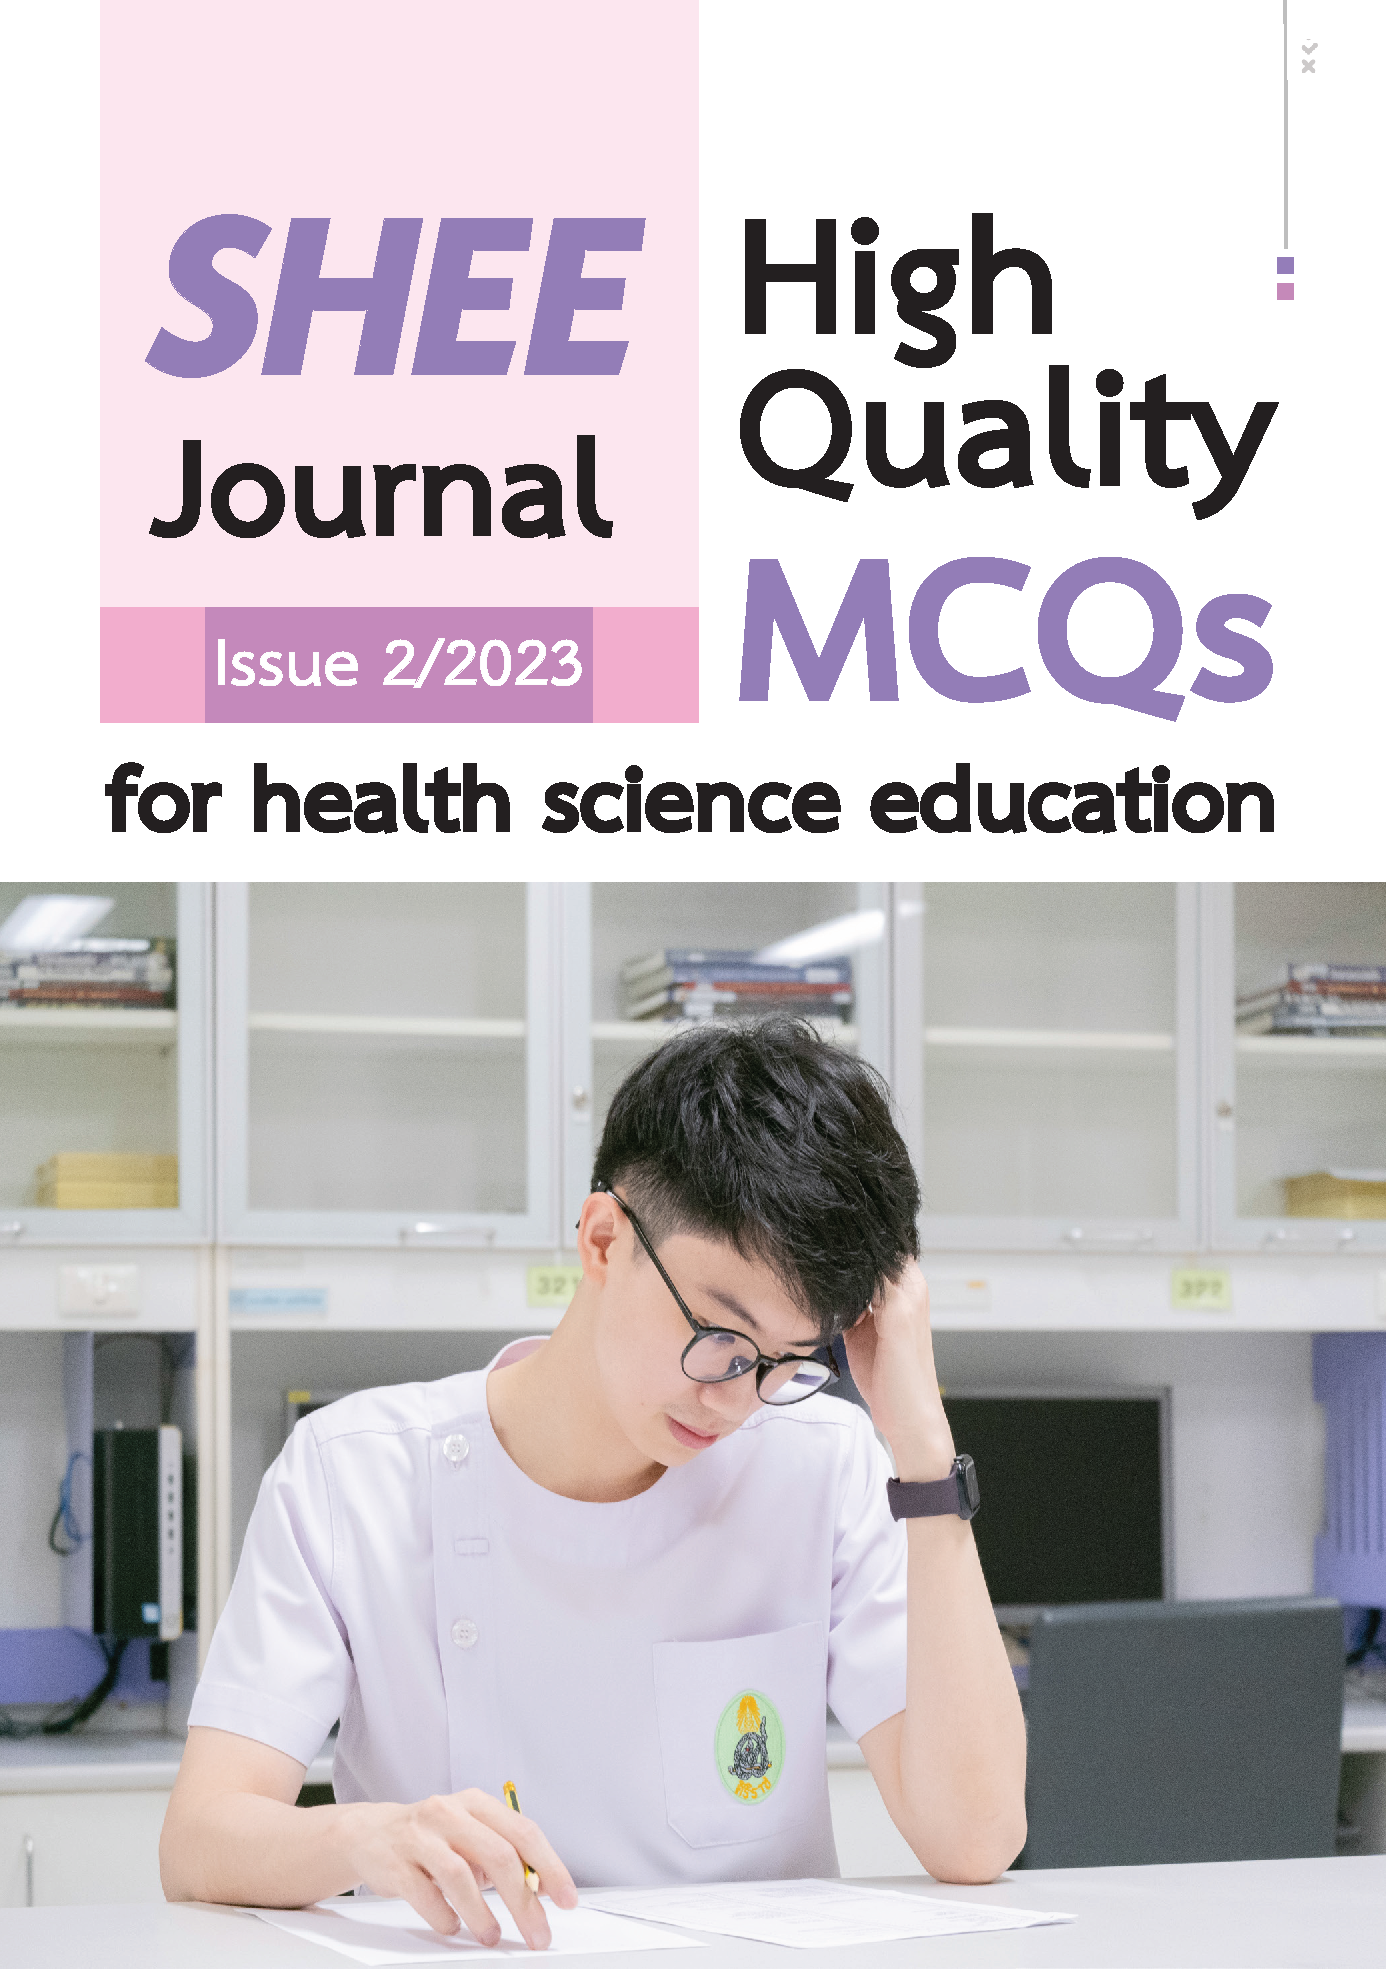 Journal Issue 2, 2023 เรื่อง High Quality MCQs for health science education